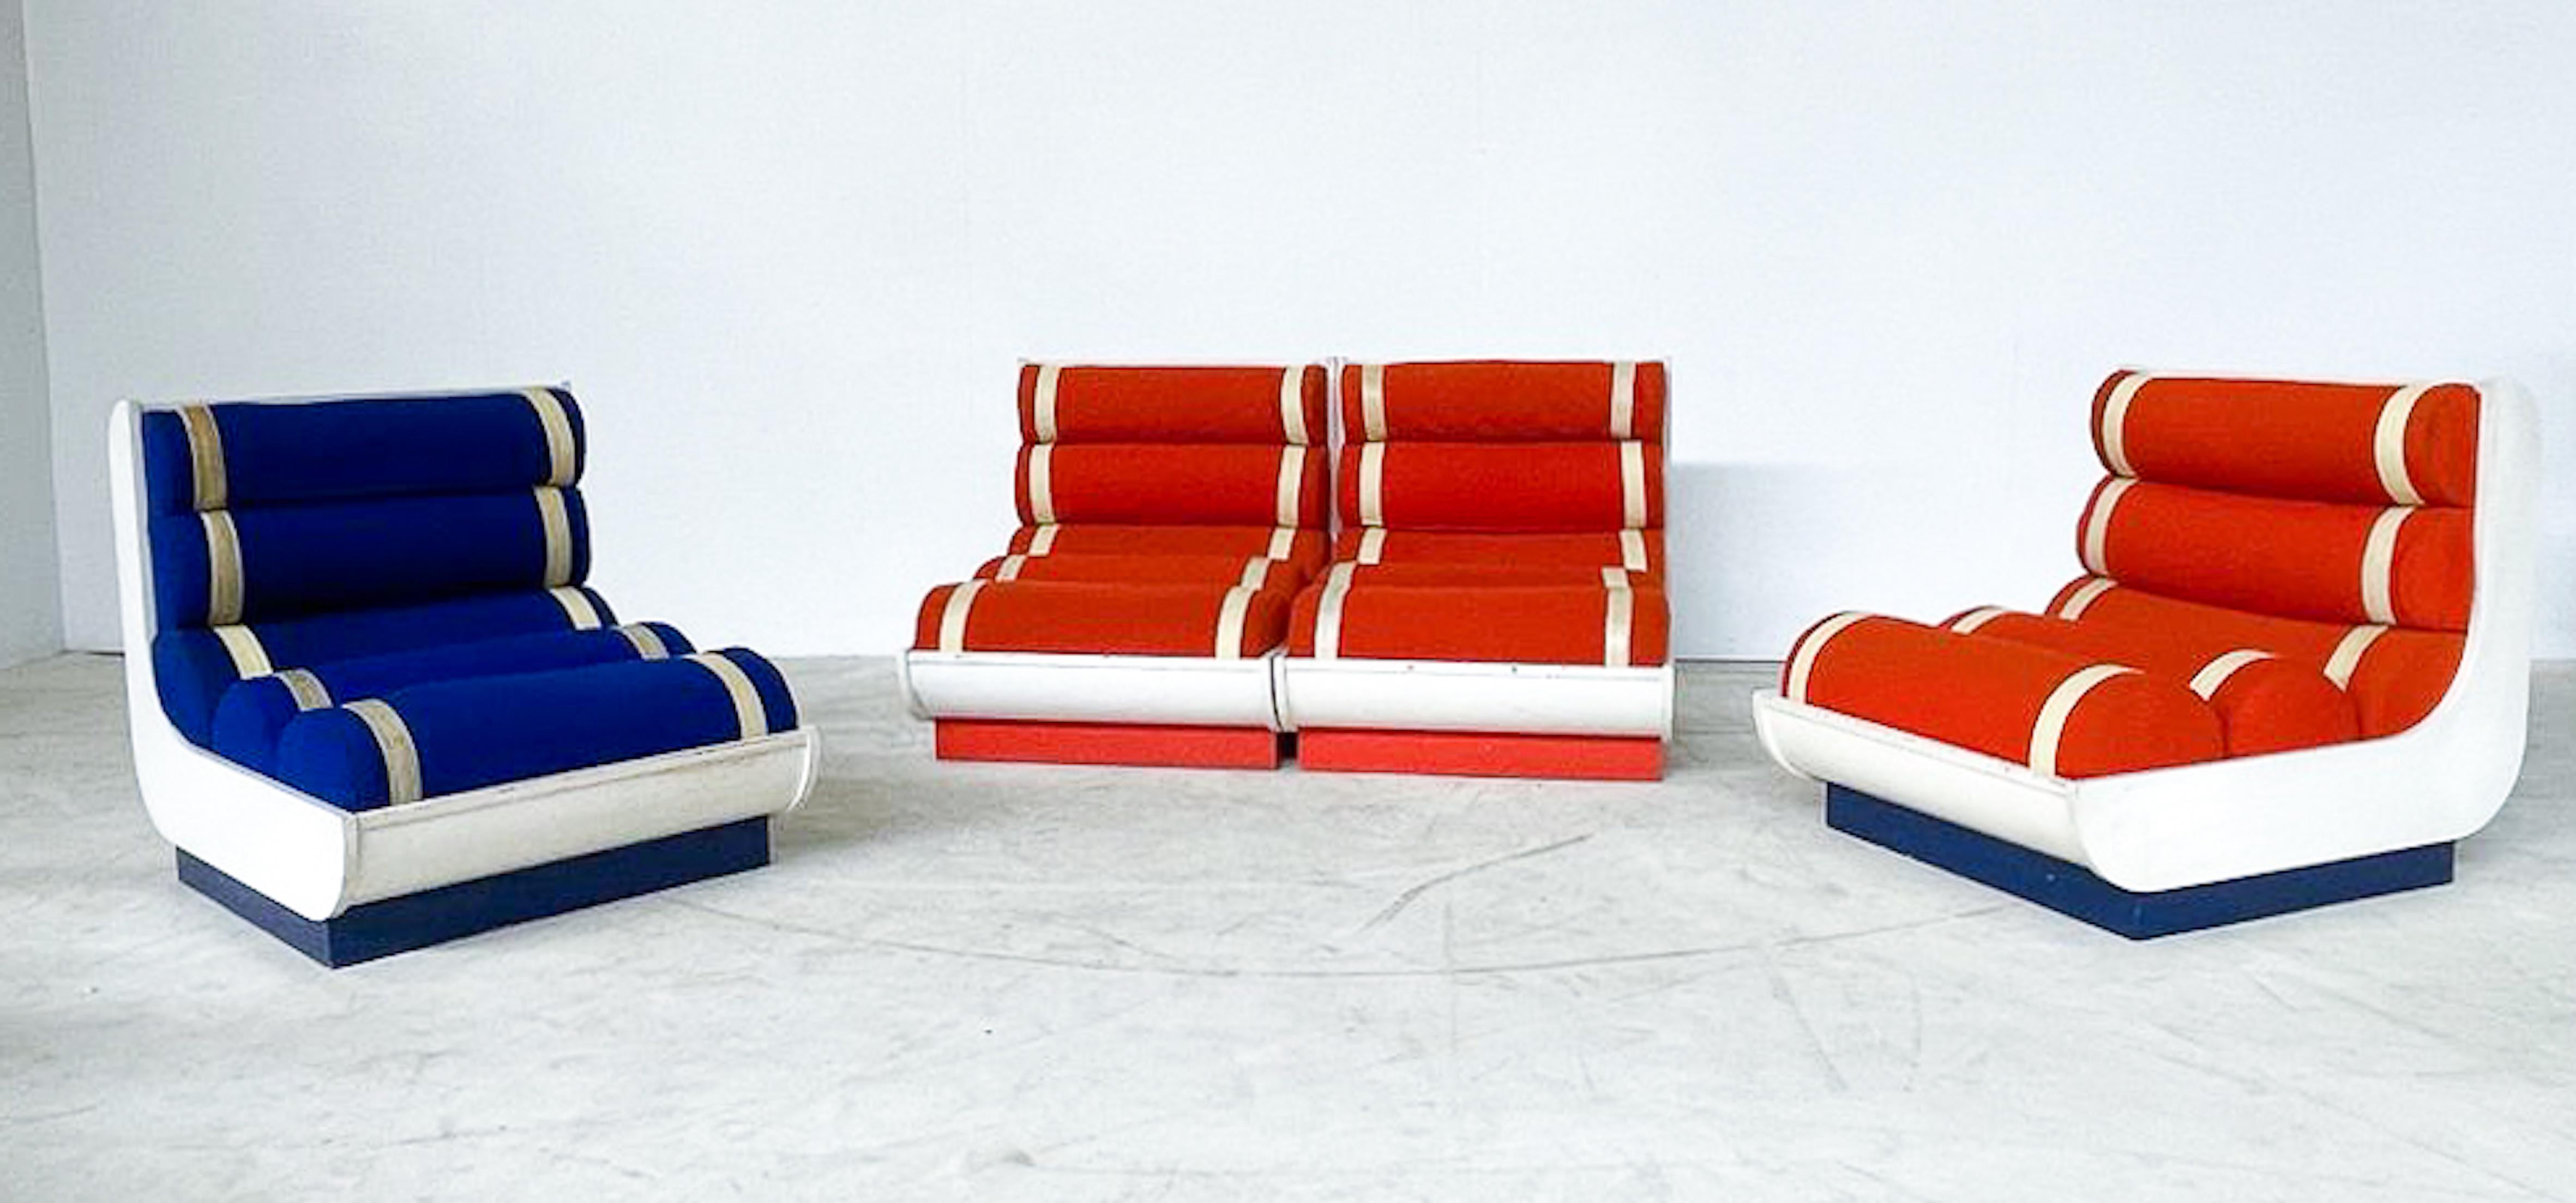 Wood Mid-Century Modern Pair of Italian Red and Blue Armchairs, 1960s For Sale